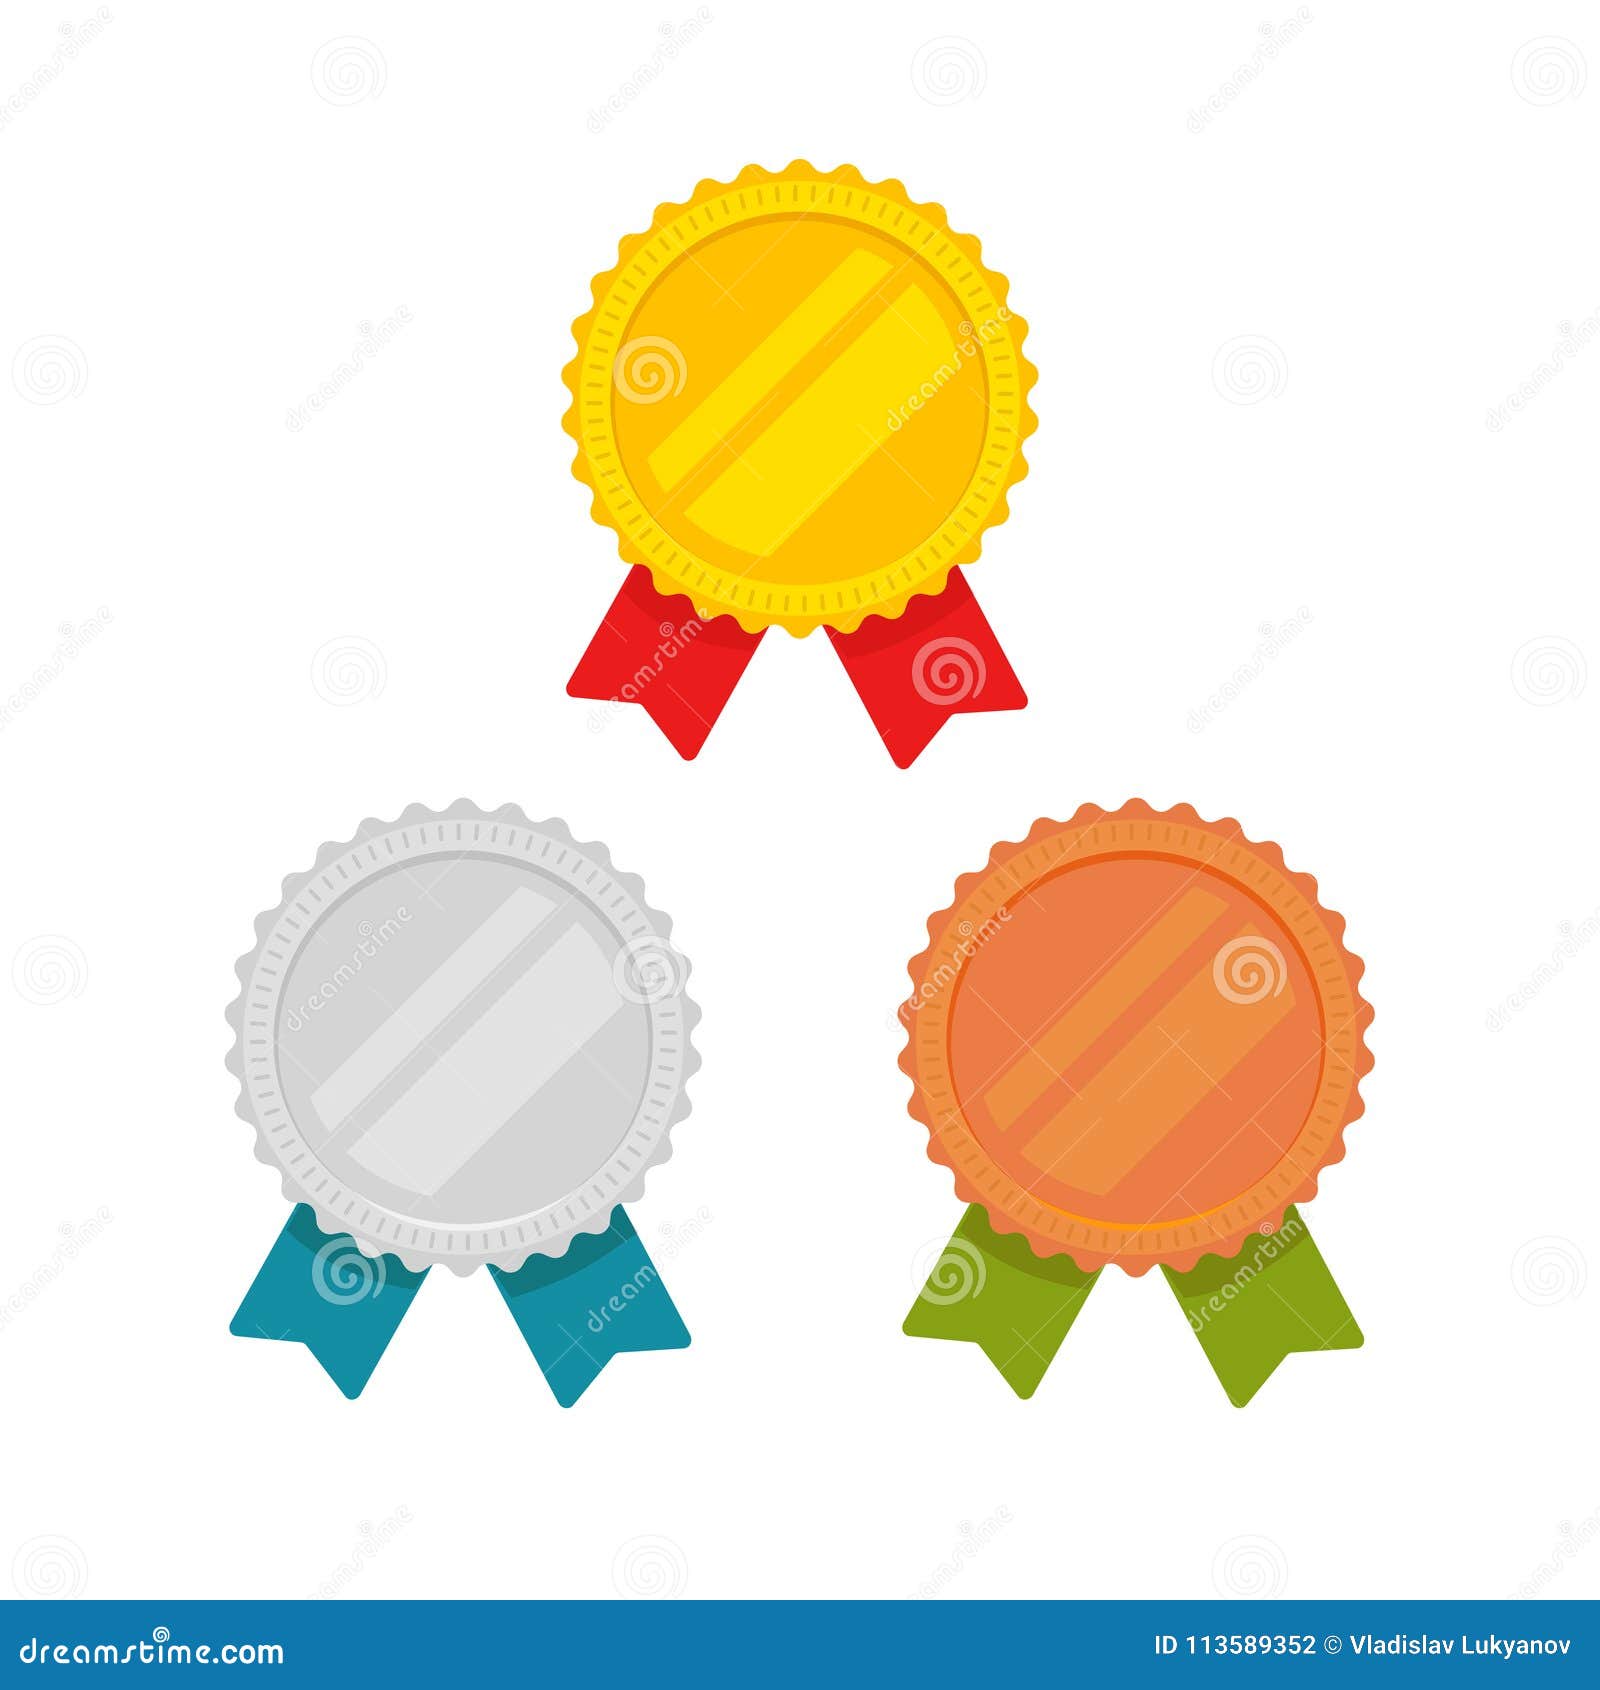 medals  set , flat cartoon gold, bronze and silver medal with red, green and blue ribbon, sport award